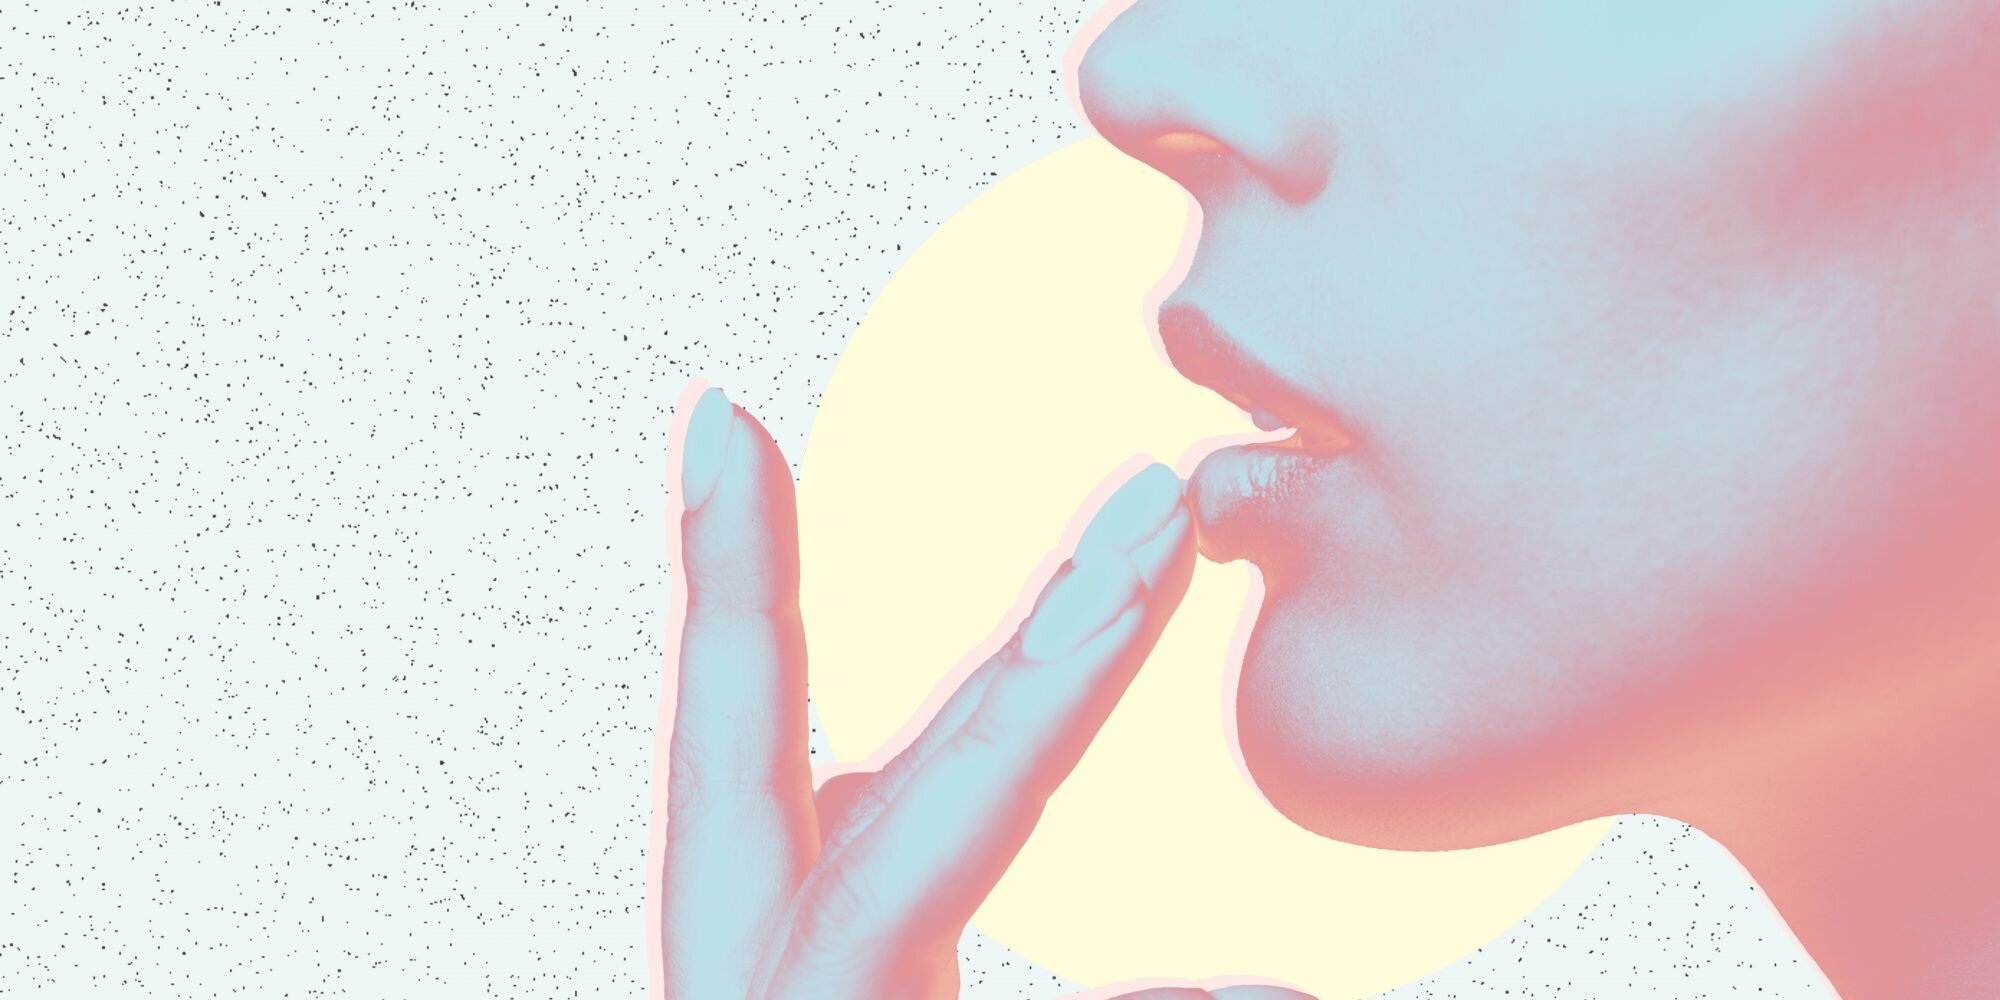 How to Know if You Have Herpes, According to Doctors